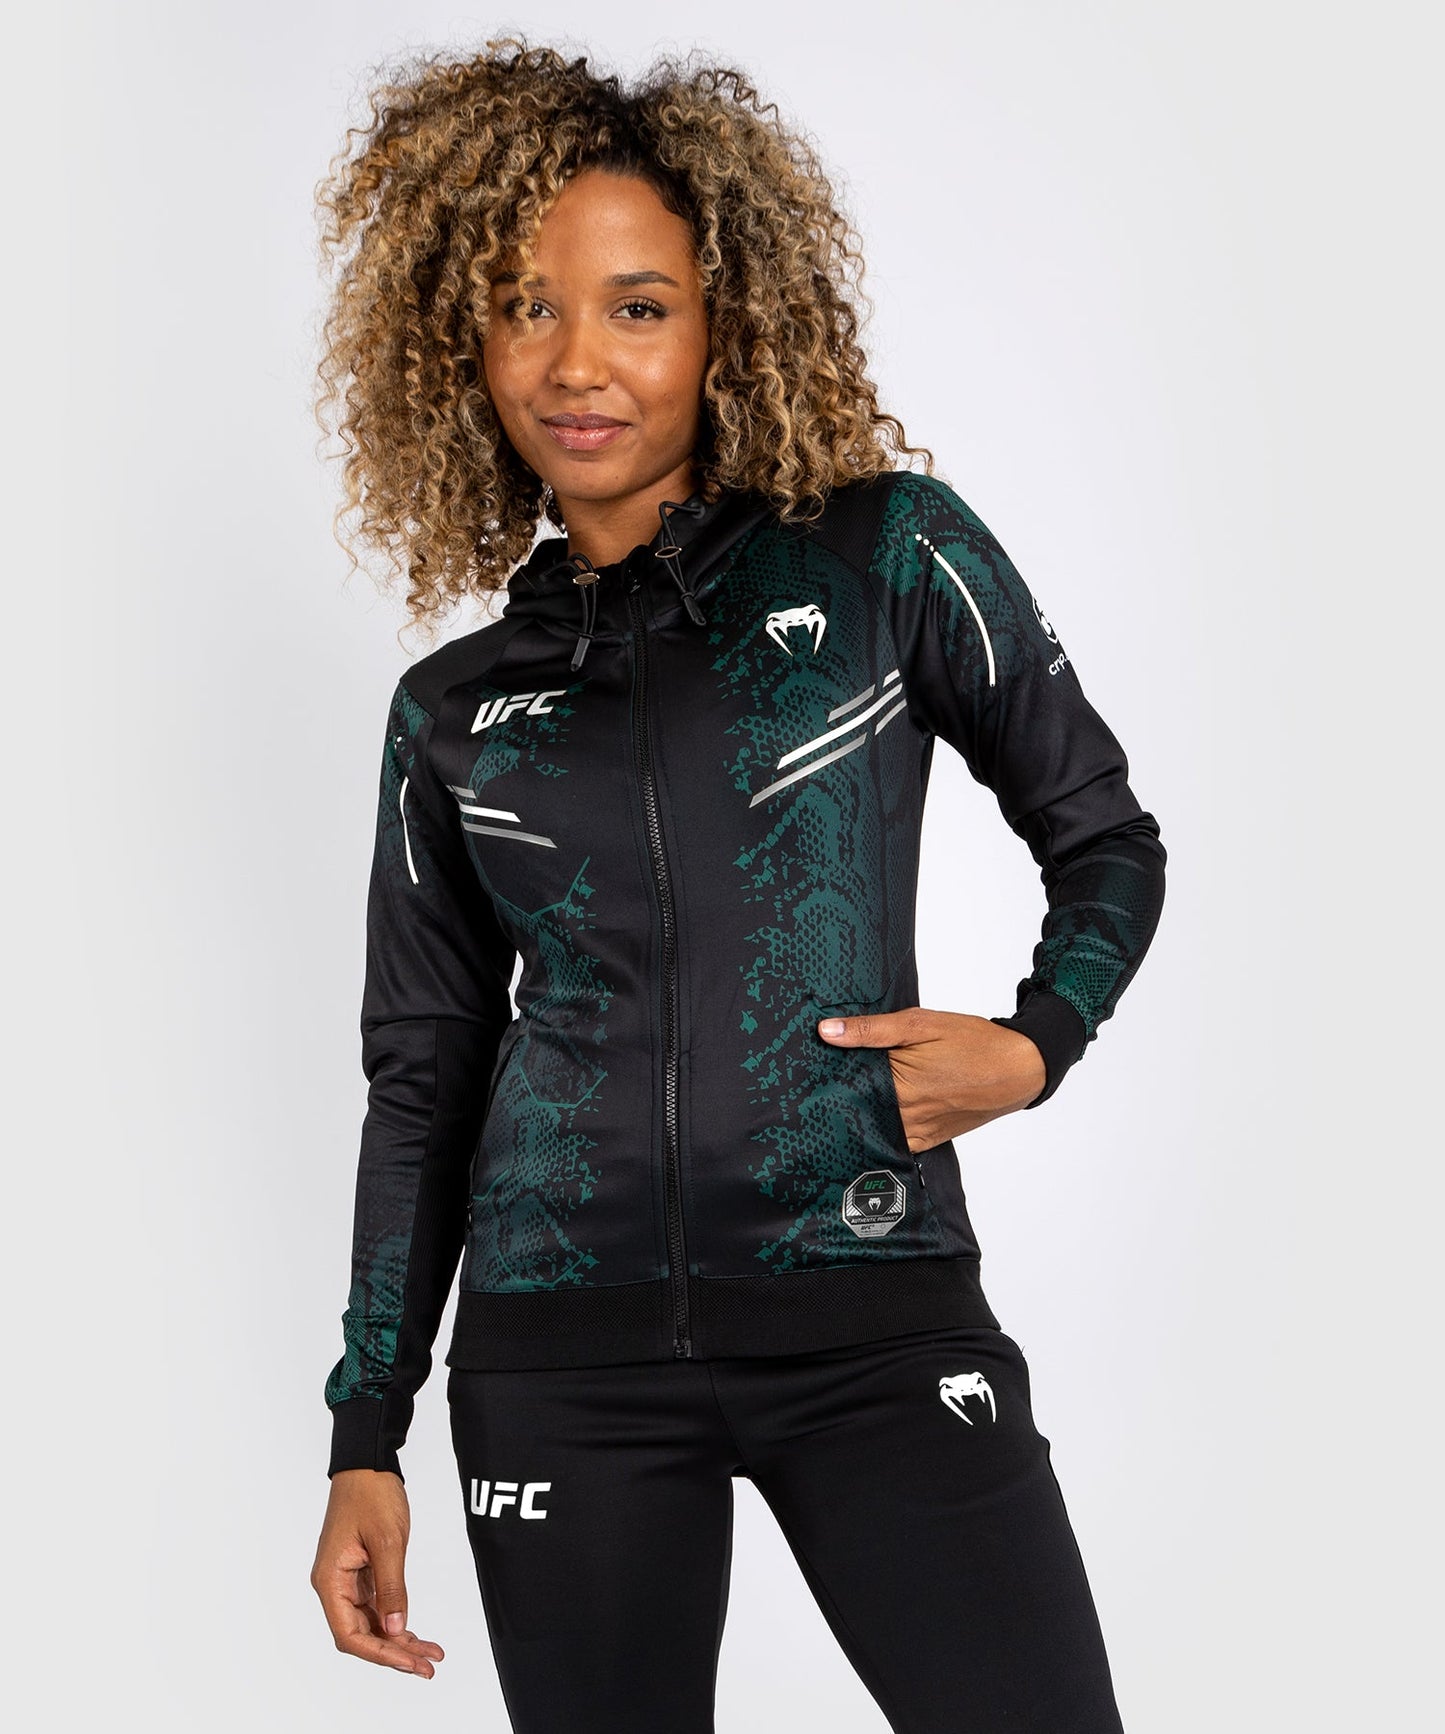 UFC Adrenaline by Venum Personalized Authentic Fight Night Sudadera con capucha Walkout para mujer - Emerald Edition - Verde/Negro